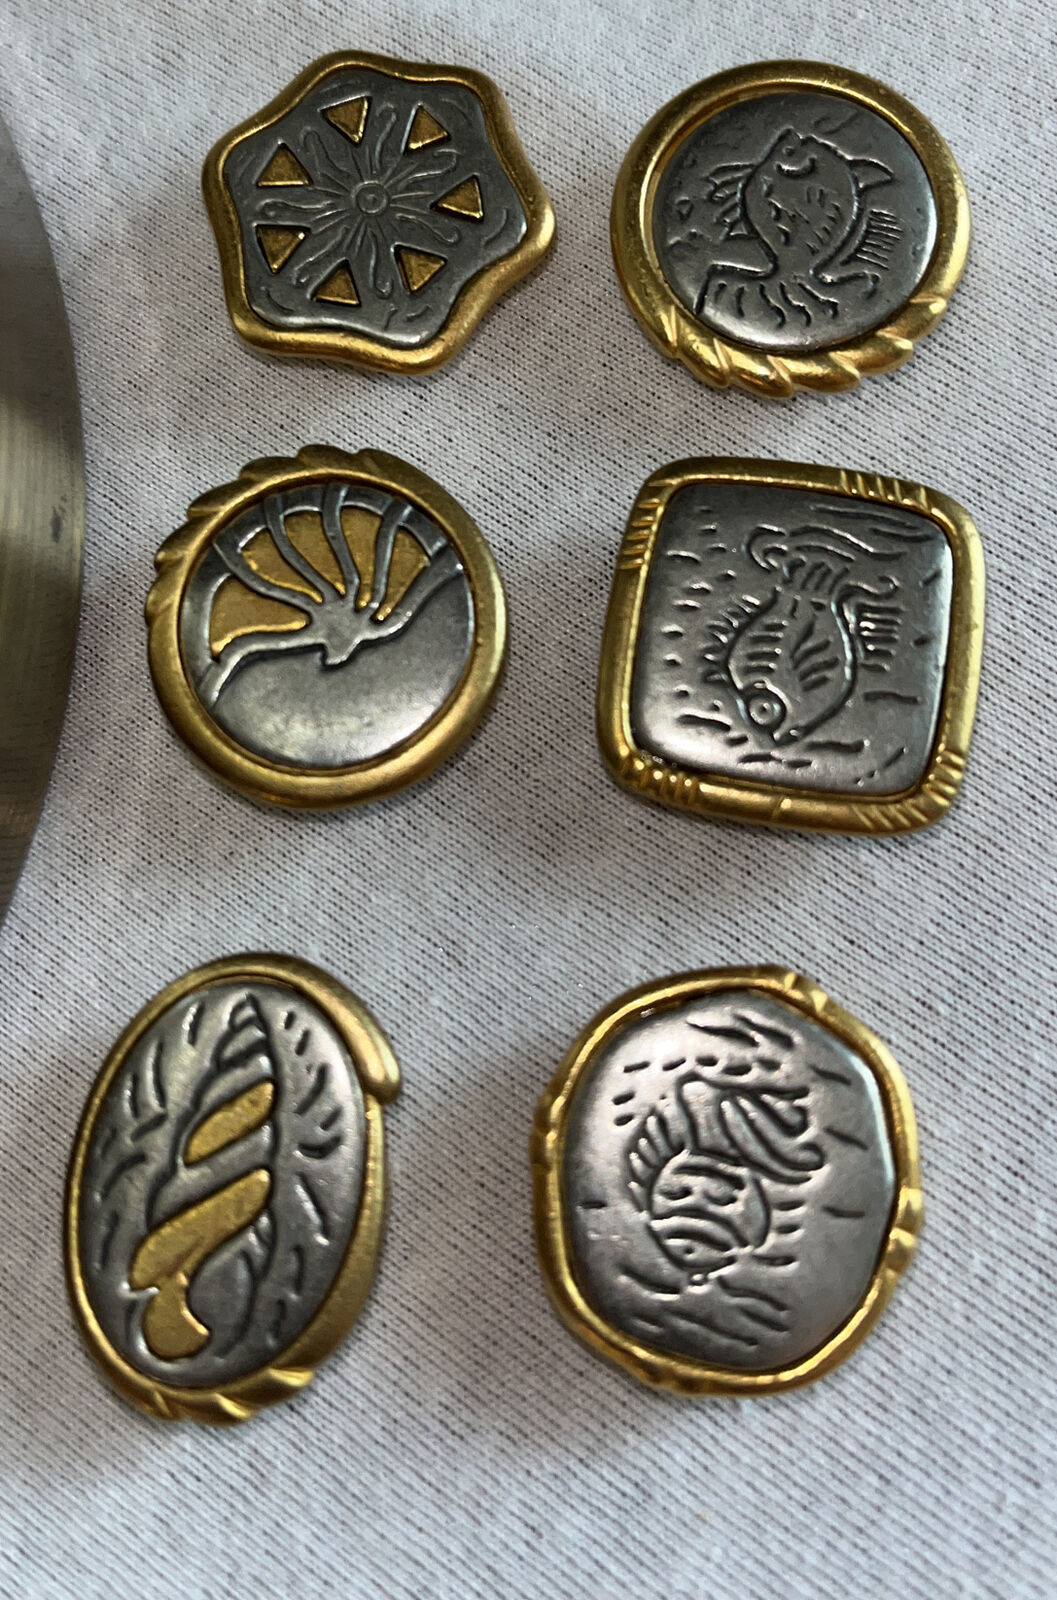 Nony Gold Silver Beach Button Covers Set Of 6 Rare Find 1 “ Overlay  Fish She’ll